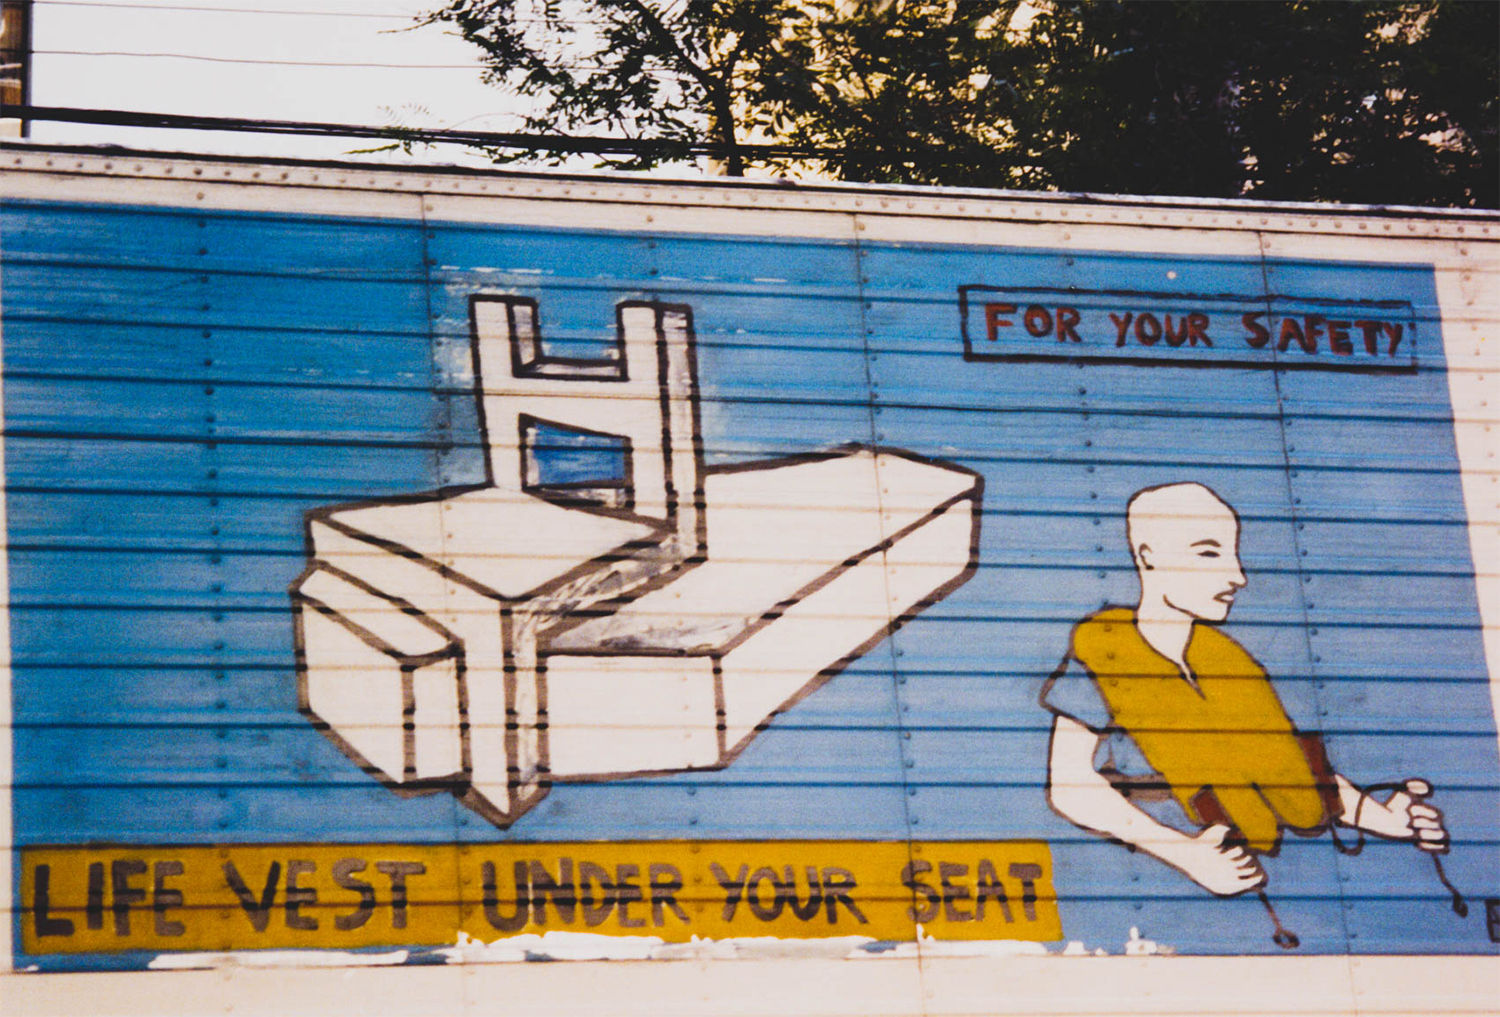 <p>An esoteric message painted on the side of a truck in São Paulo, Brazil.</p>